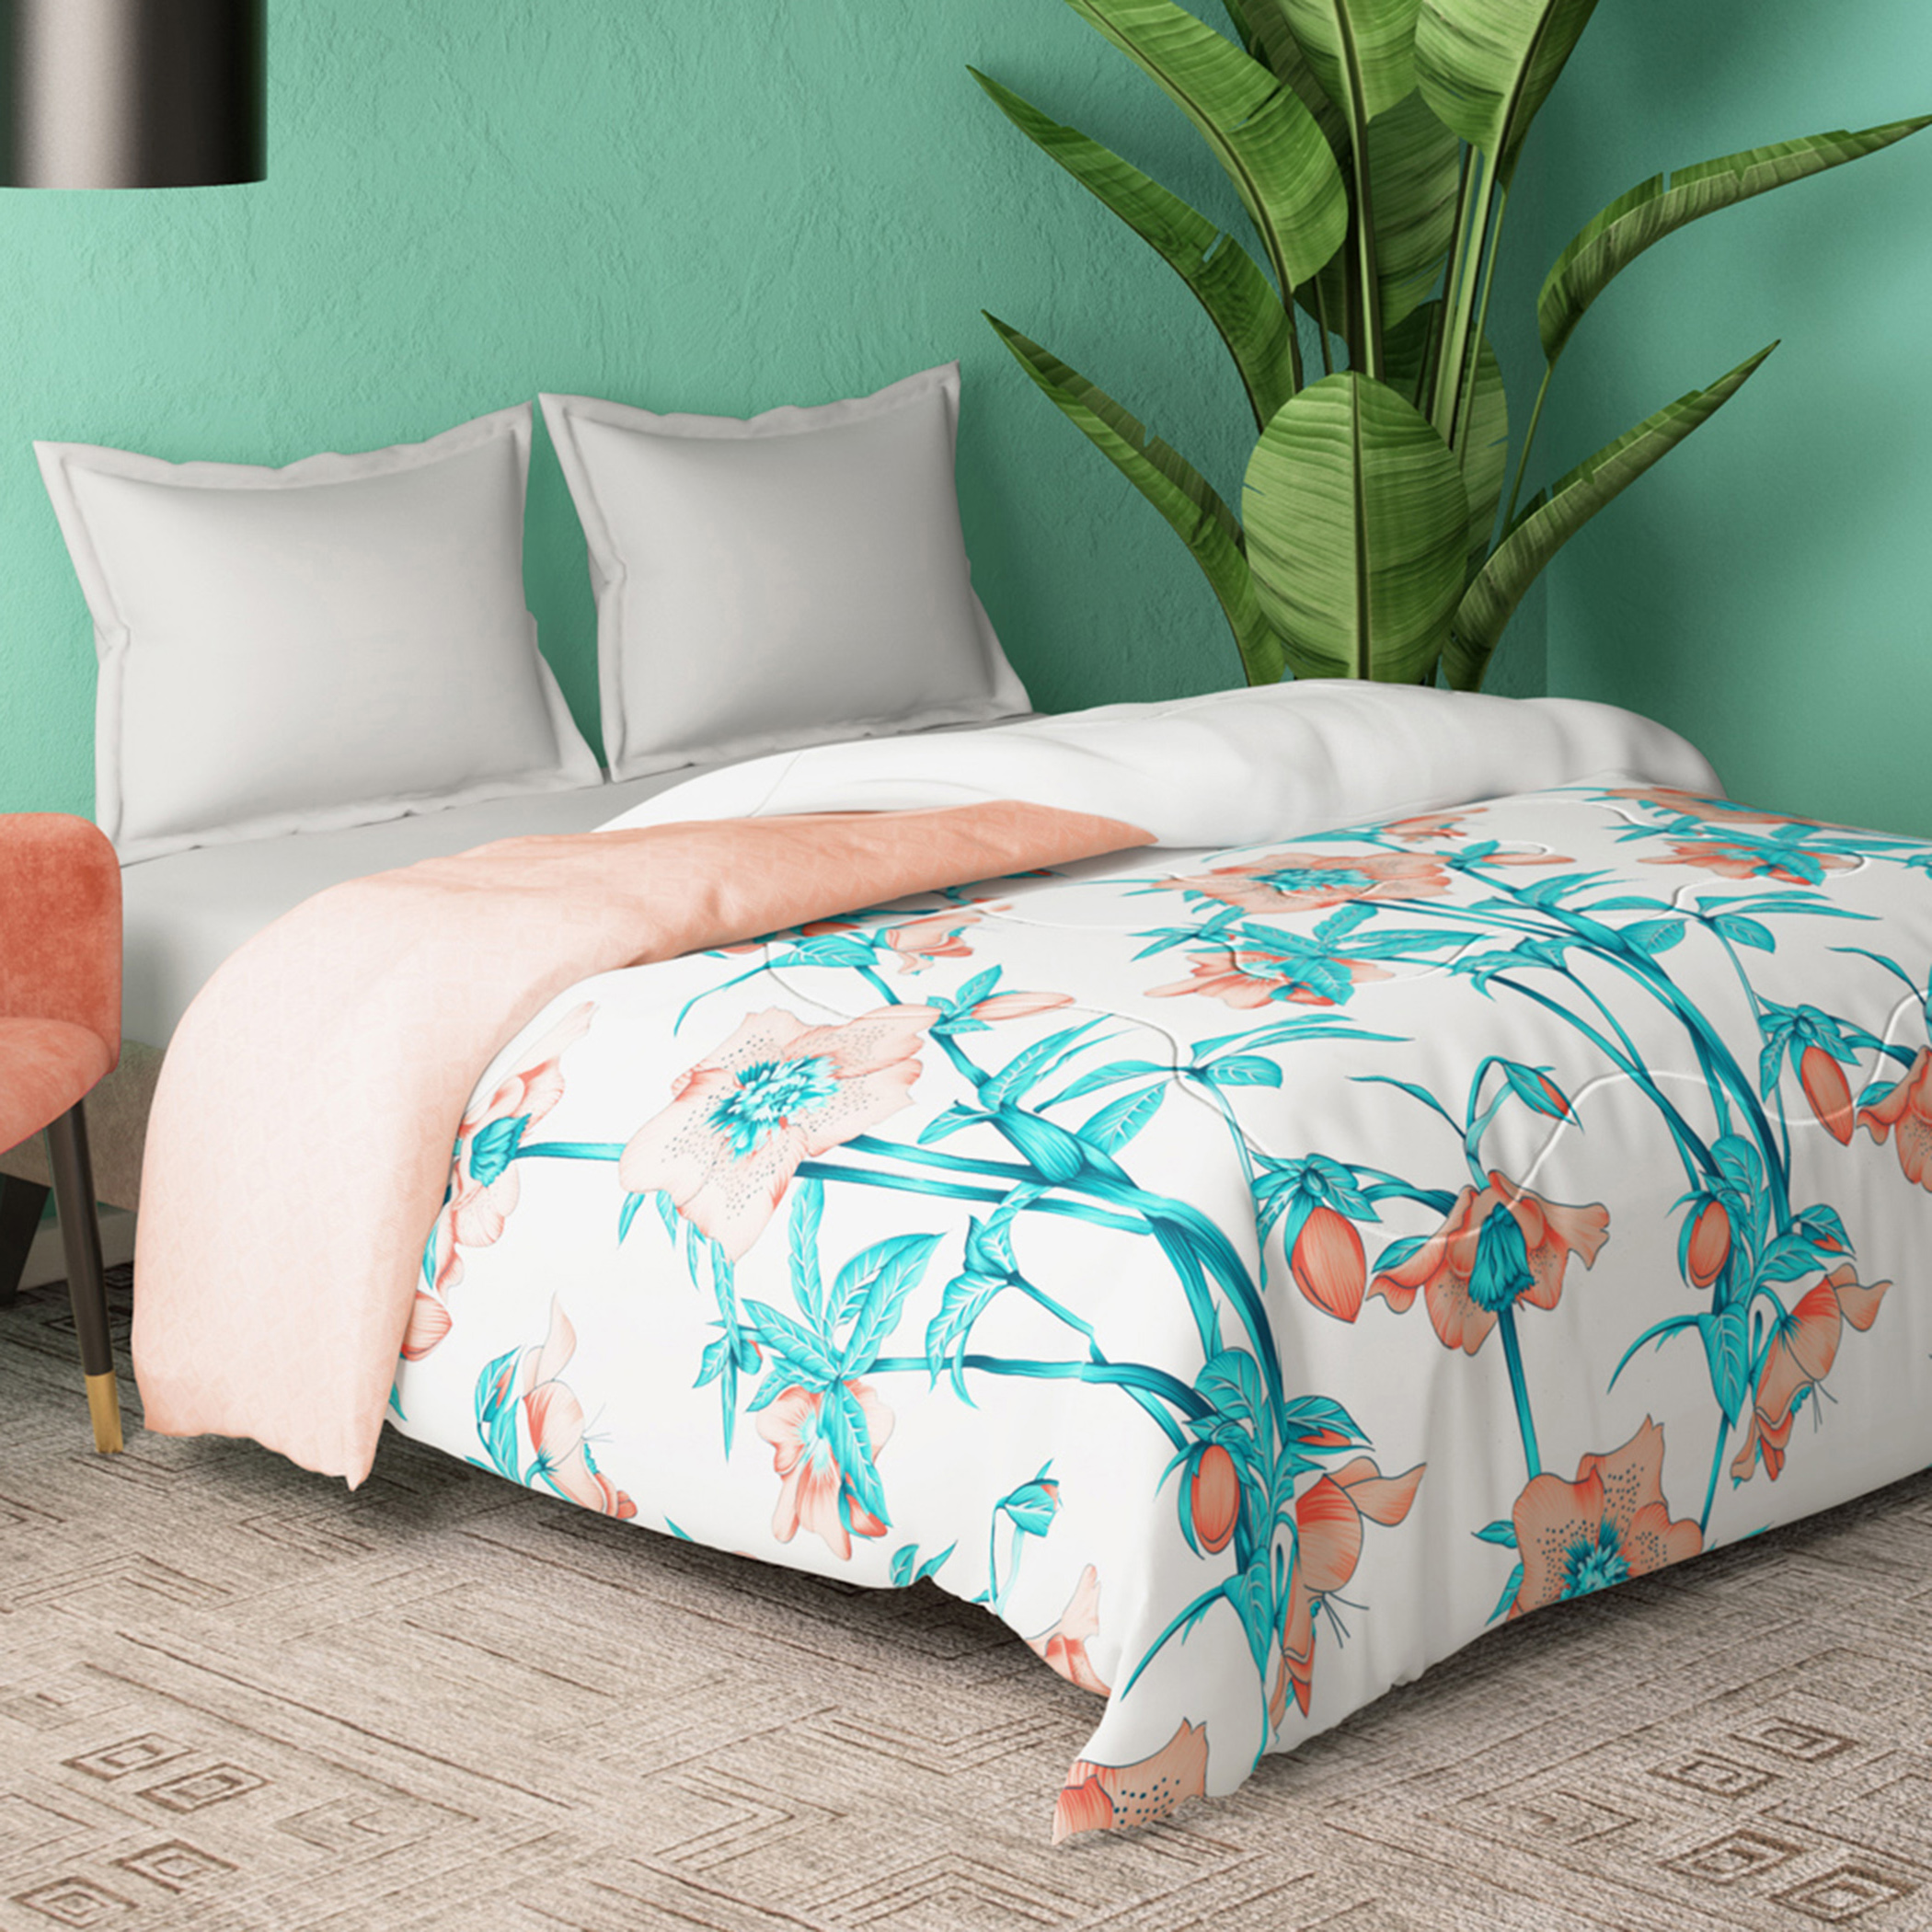 PORTICO Cadence Pink Printed Reversible Cotton King Comforter - 224x274cm